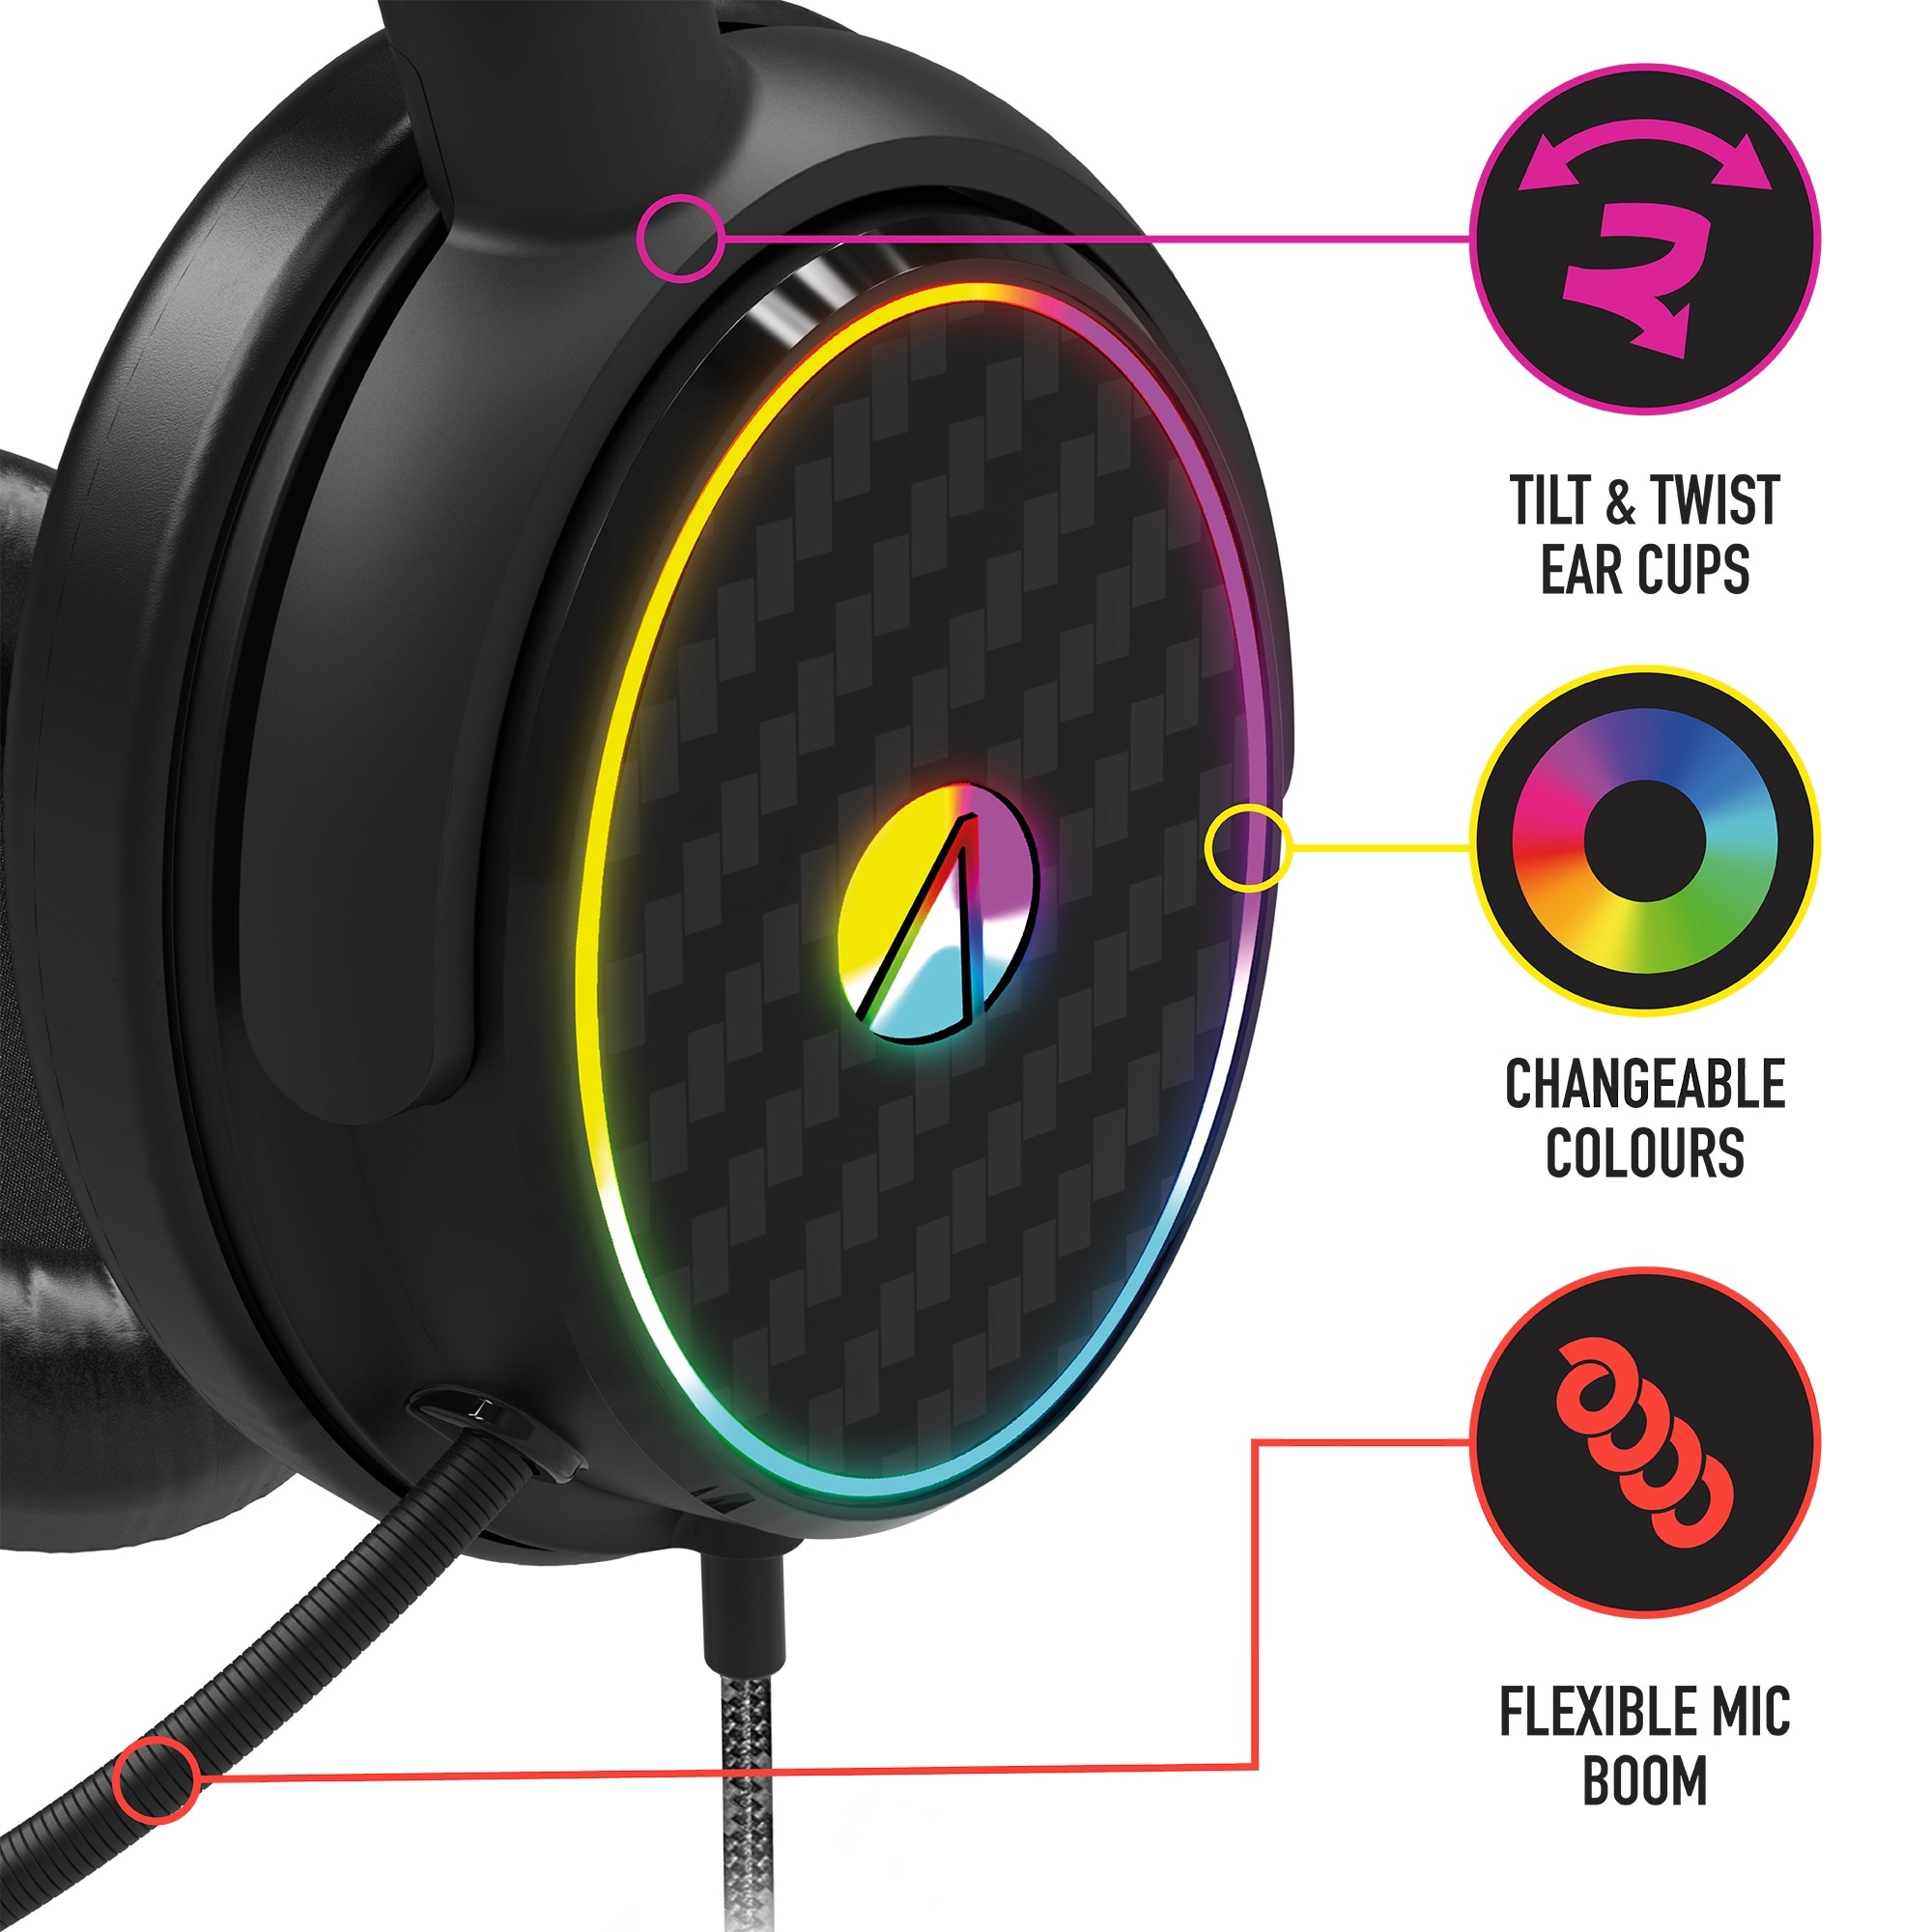 »Stereo | Headset Verpackung online mit Gaming kaufen Plastikfreie Beleuchtung«, LED Stealth C6-100 UNIVERSAL Gaming-Headset